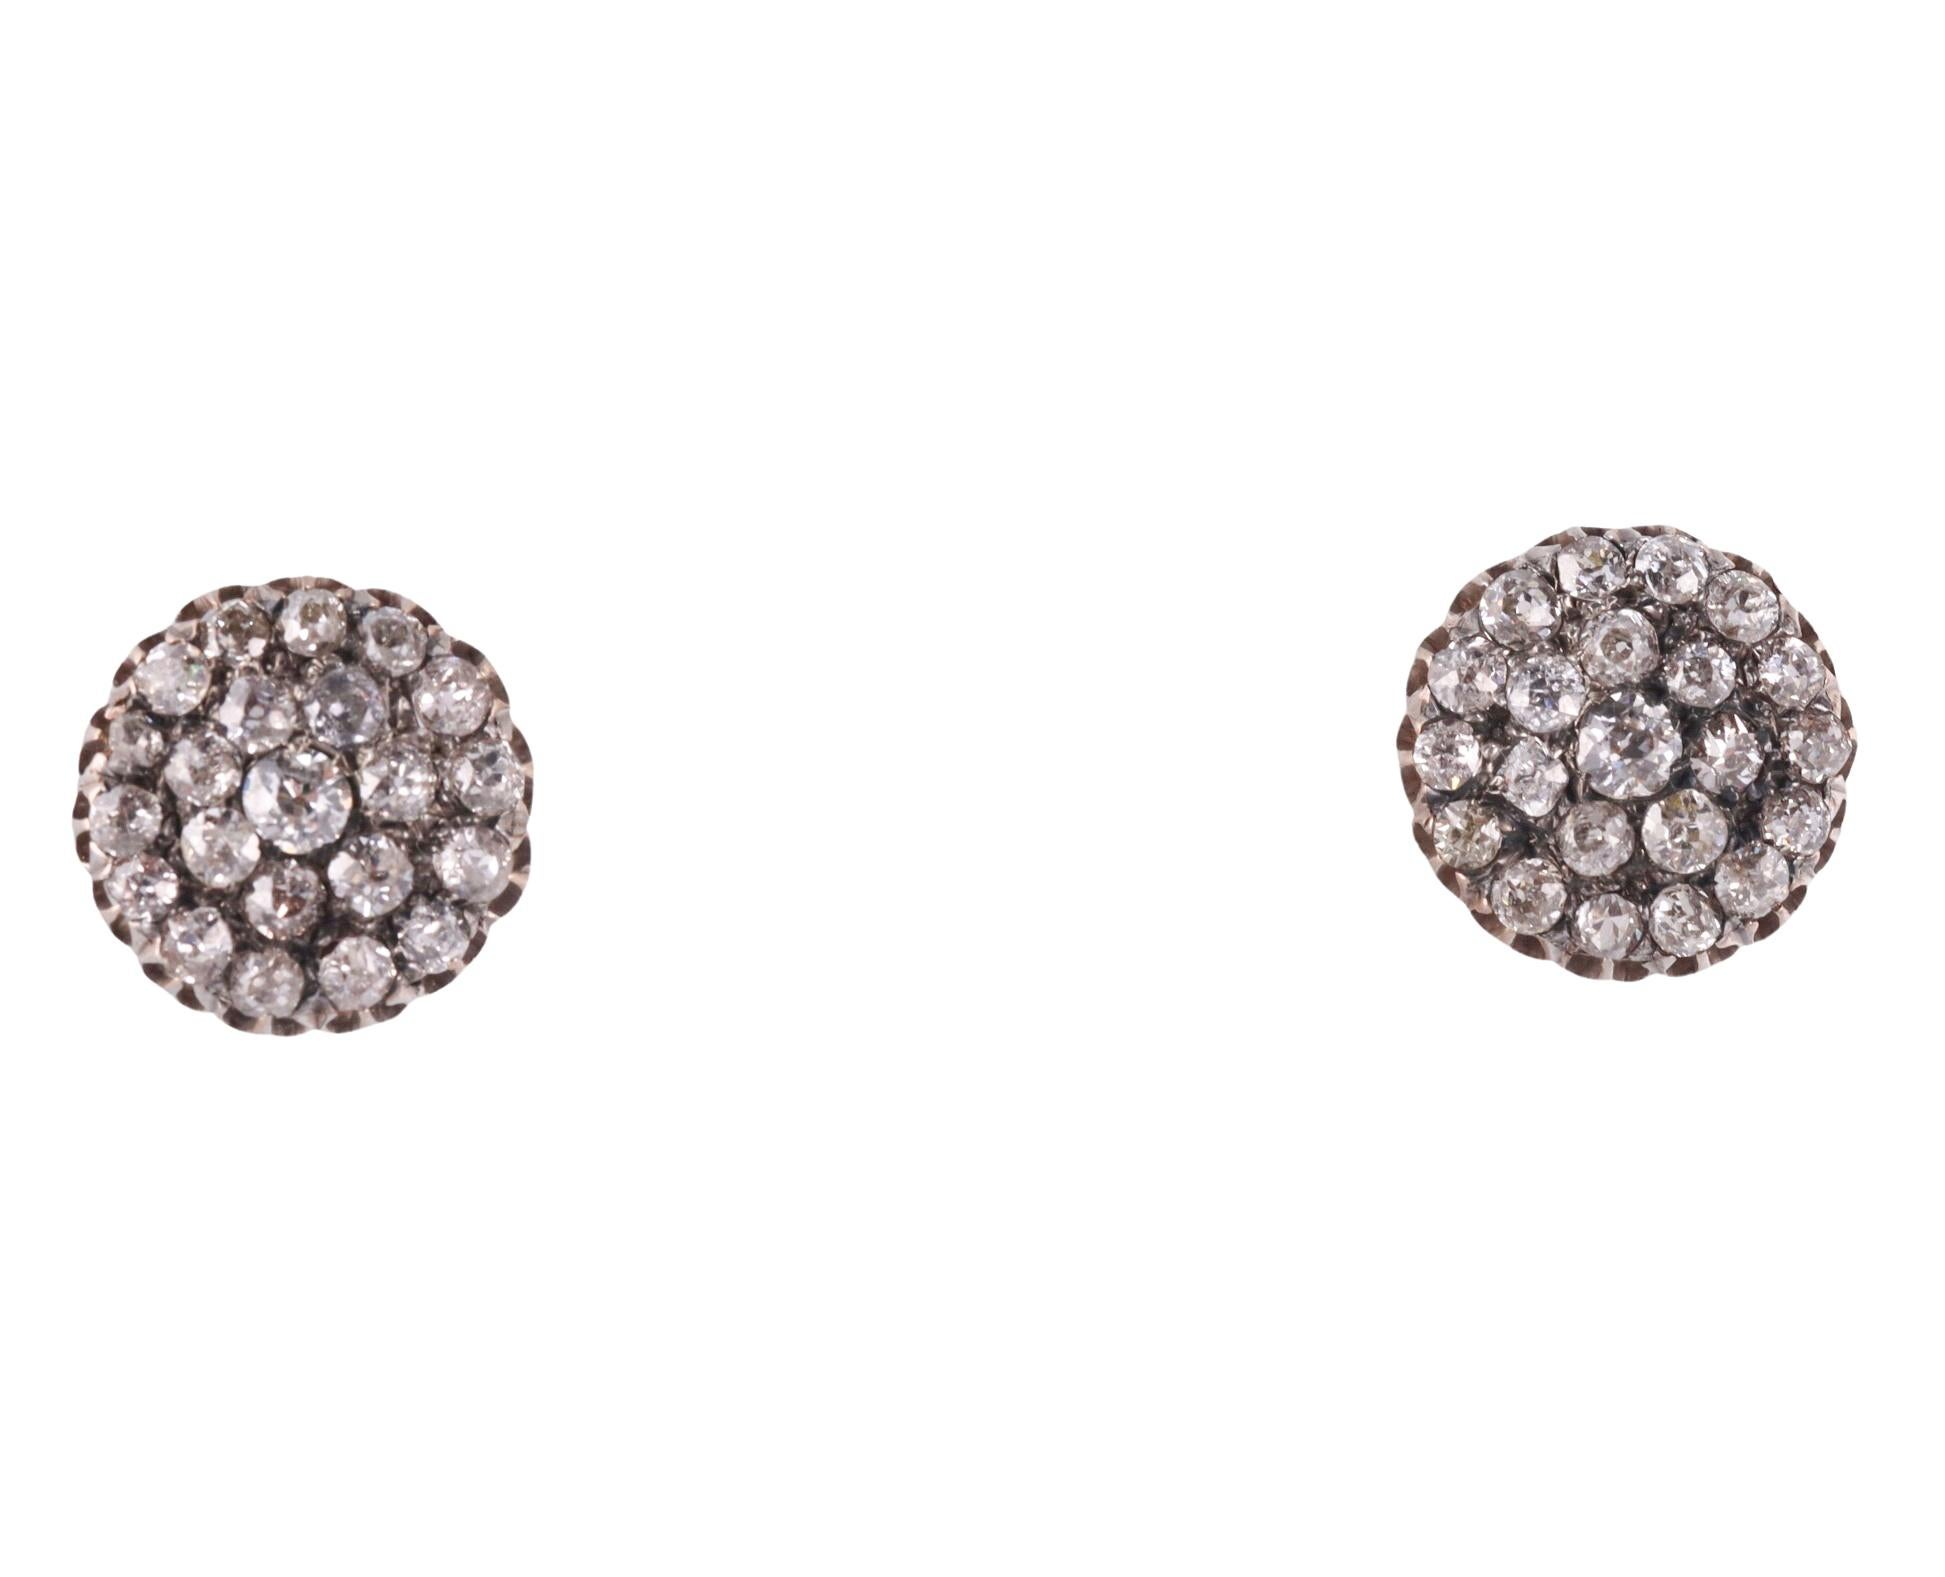 Pair of 14k gold and silver stud earrings, set with a total of approx.  2.30ctw in old mine cut diamonds. The earrings measure 14mm in diameter and weigh 3.7 grams. Not marked, tested 14k and silver. With screw posts.